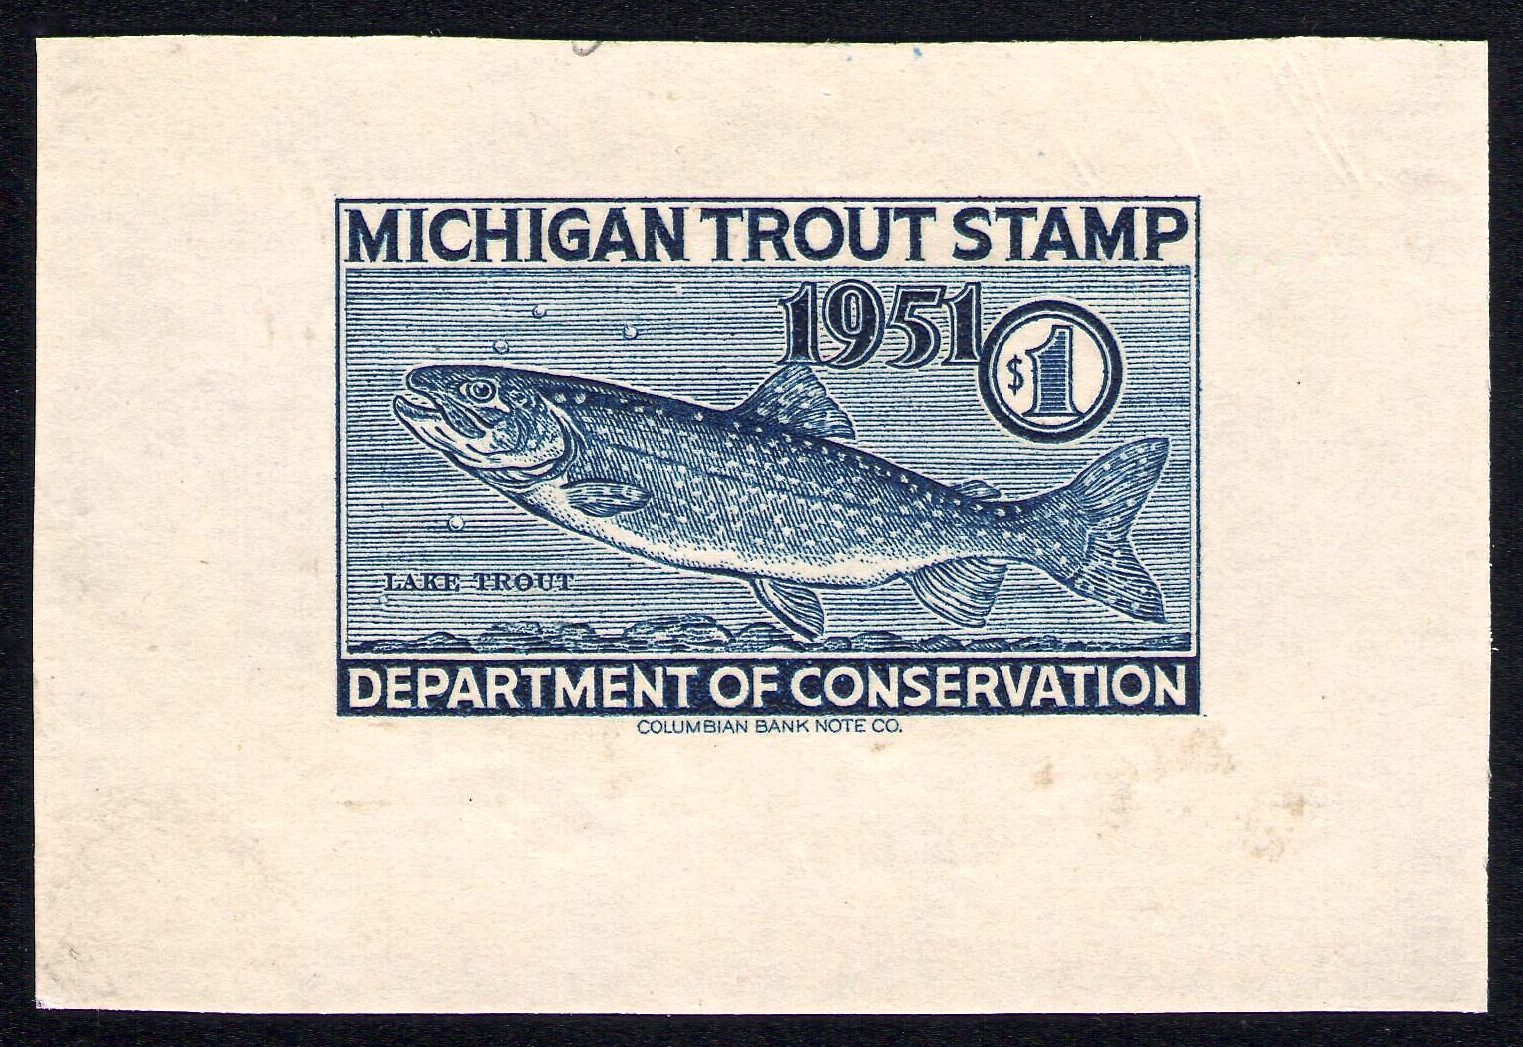 1951 Large Die Proof Michigan Trout